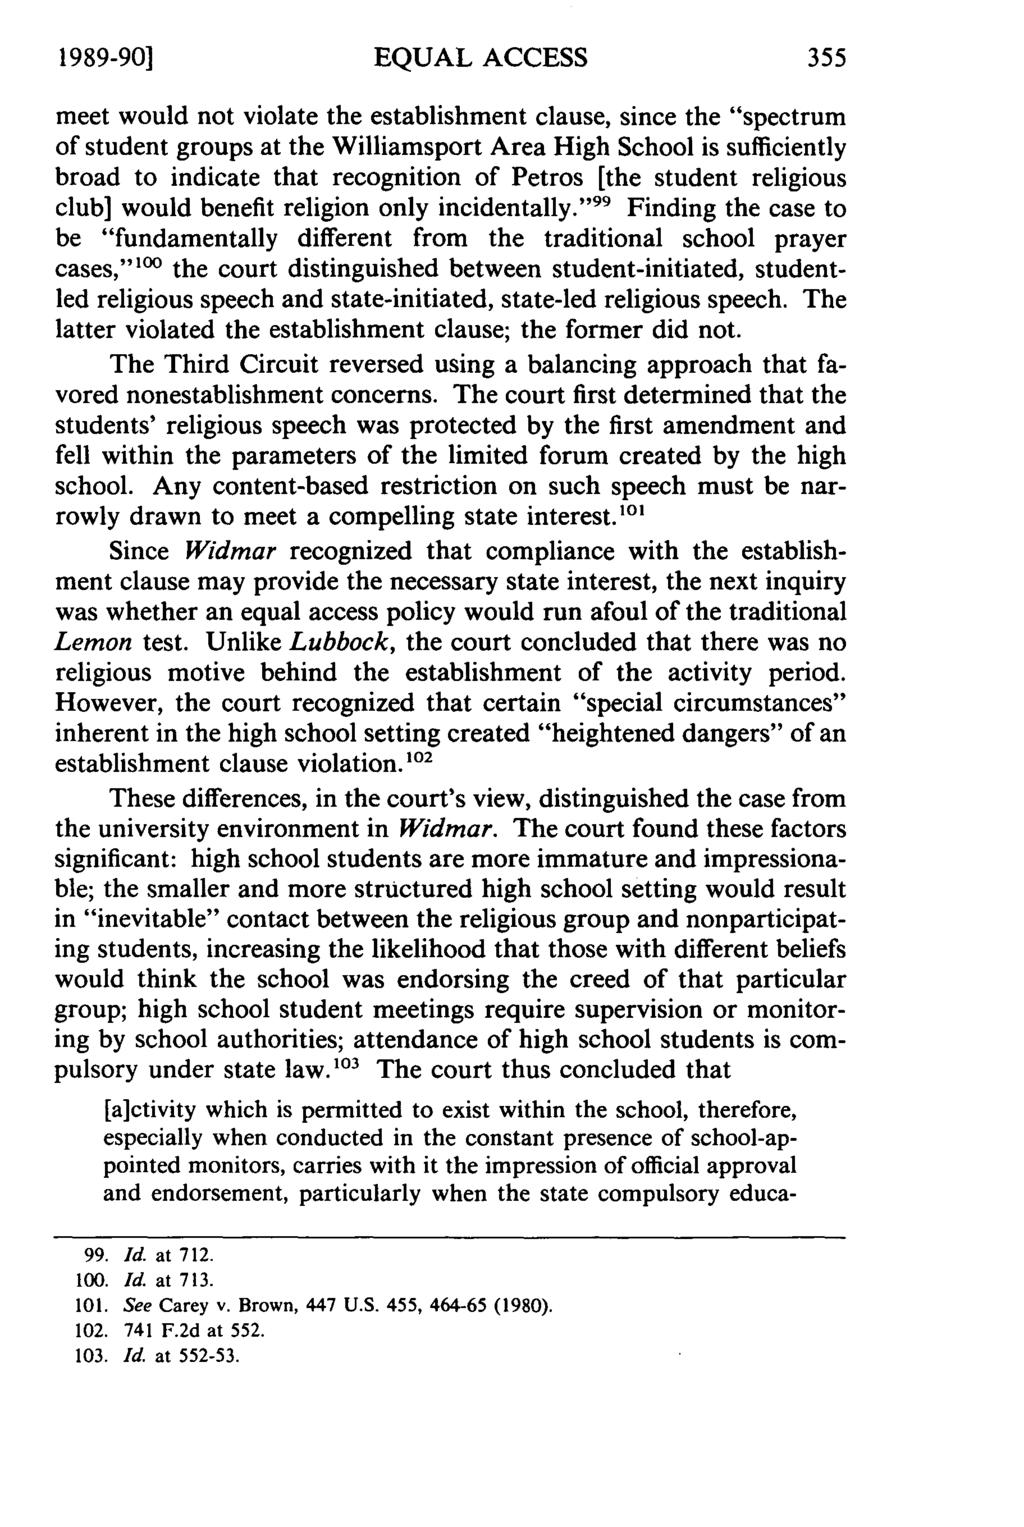 1989-901 EQUAL ACCESS meet would not violate the establishment clause, since the "spectrum of student groups at the Williamsport Area High School is sufficiently broad to indicate that recognition of